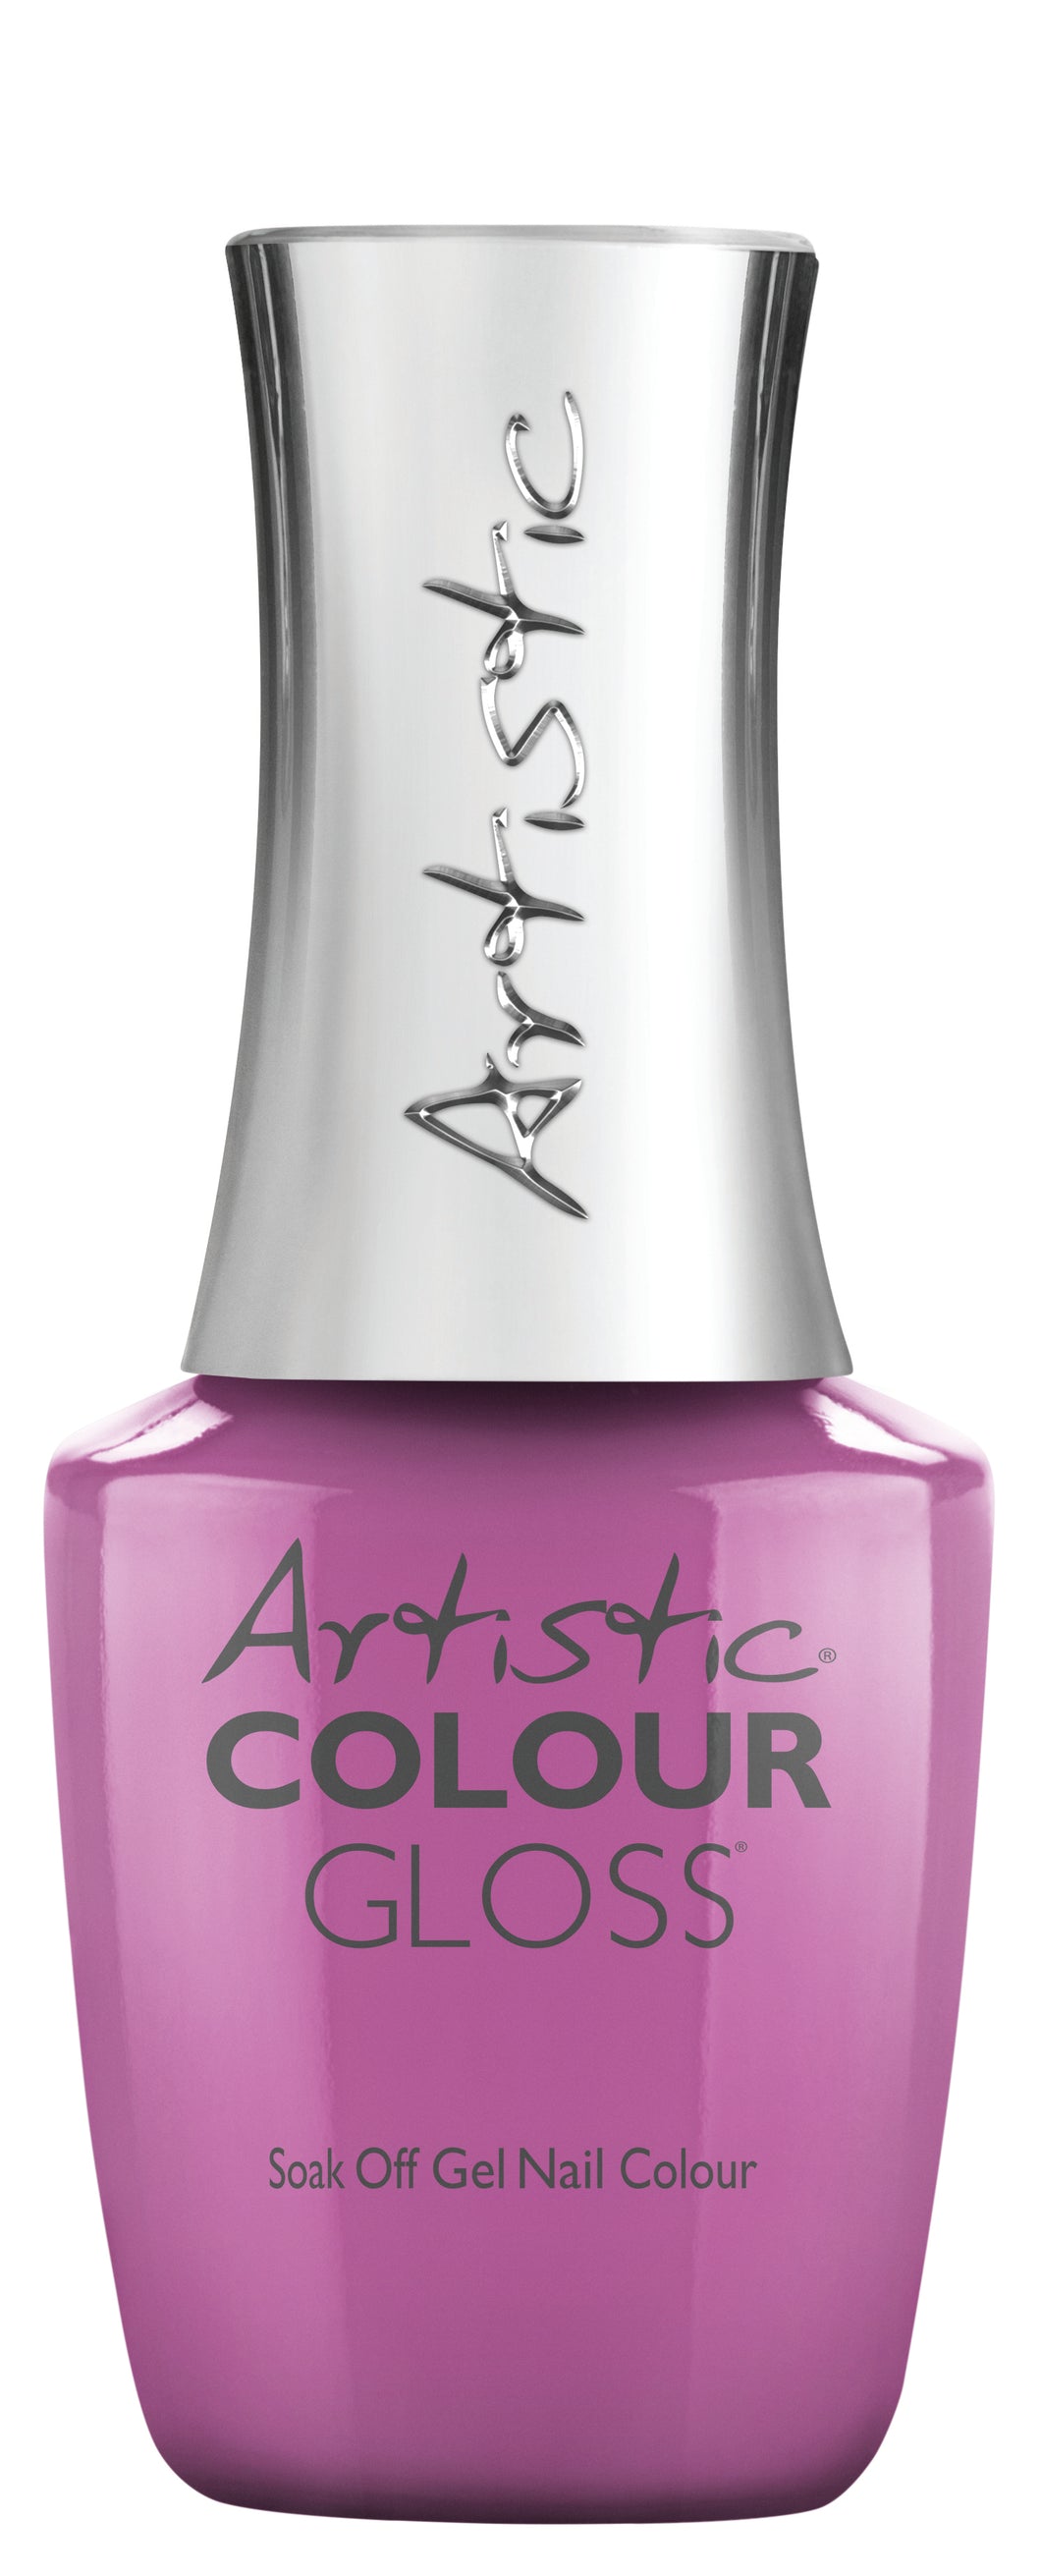 ARTISTIC - CUT TO THE CHASE - LIGHT PURPLE/PINK CRÈME - Gel 15ml - Professional Salon Brands